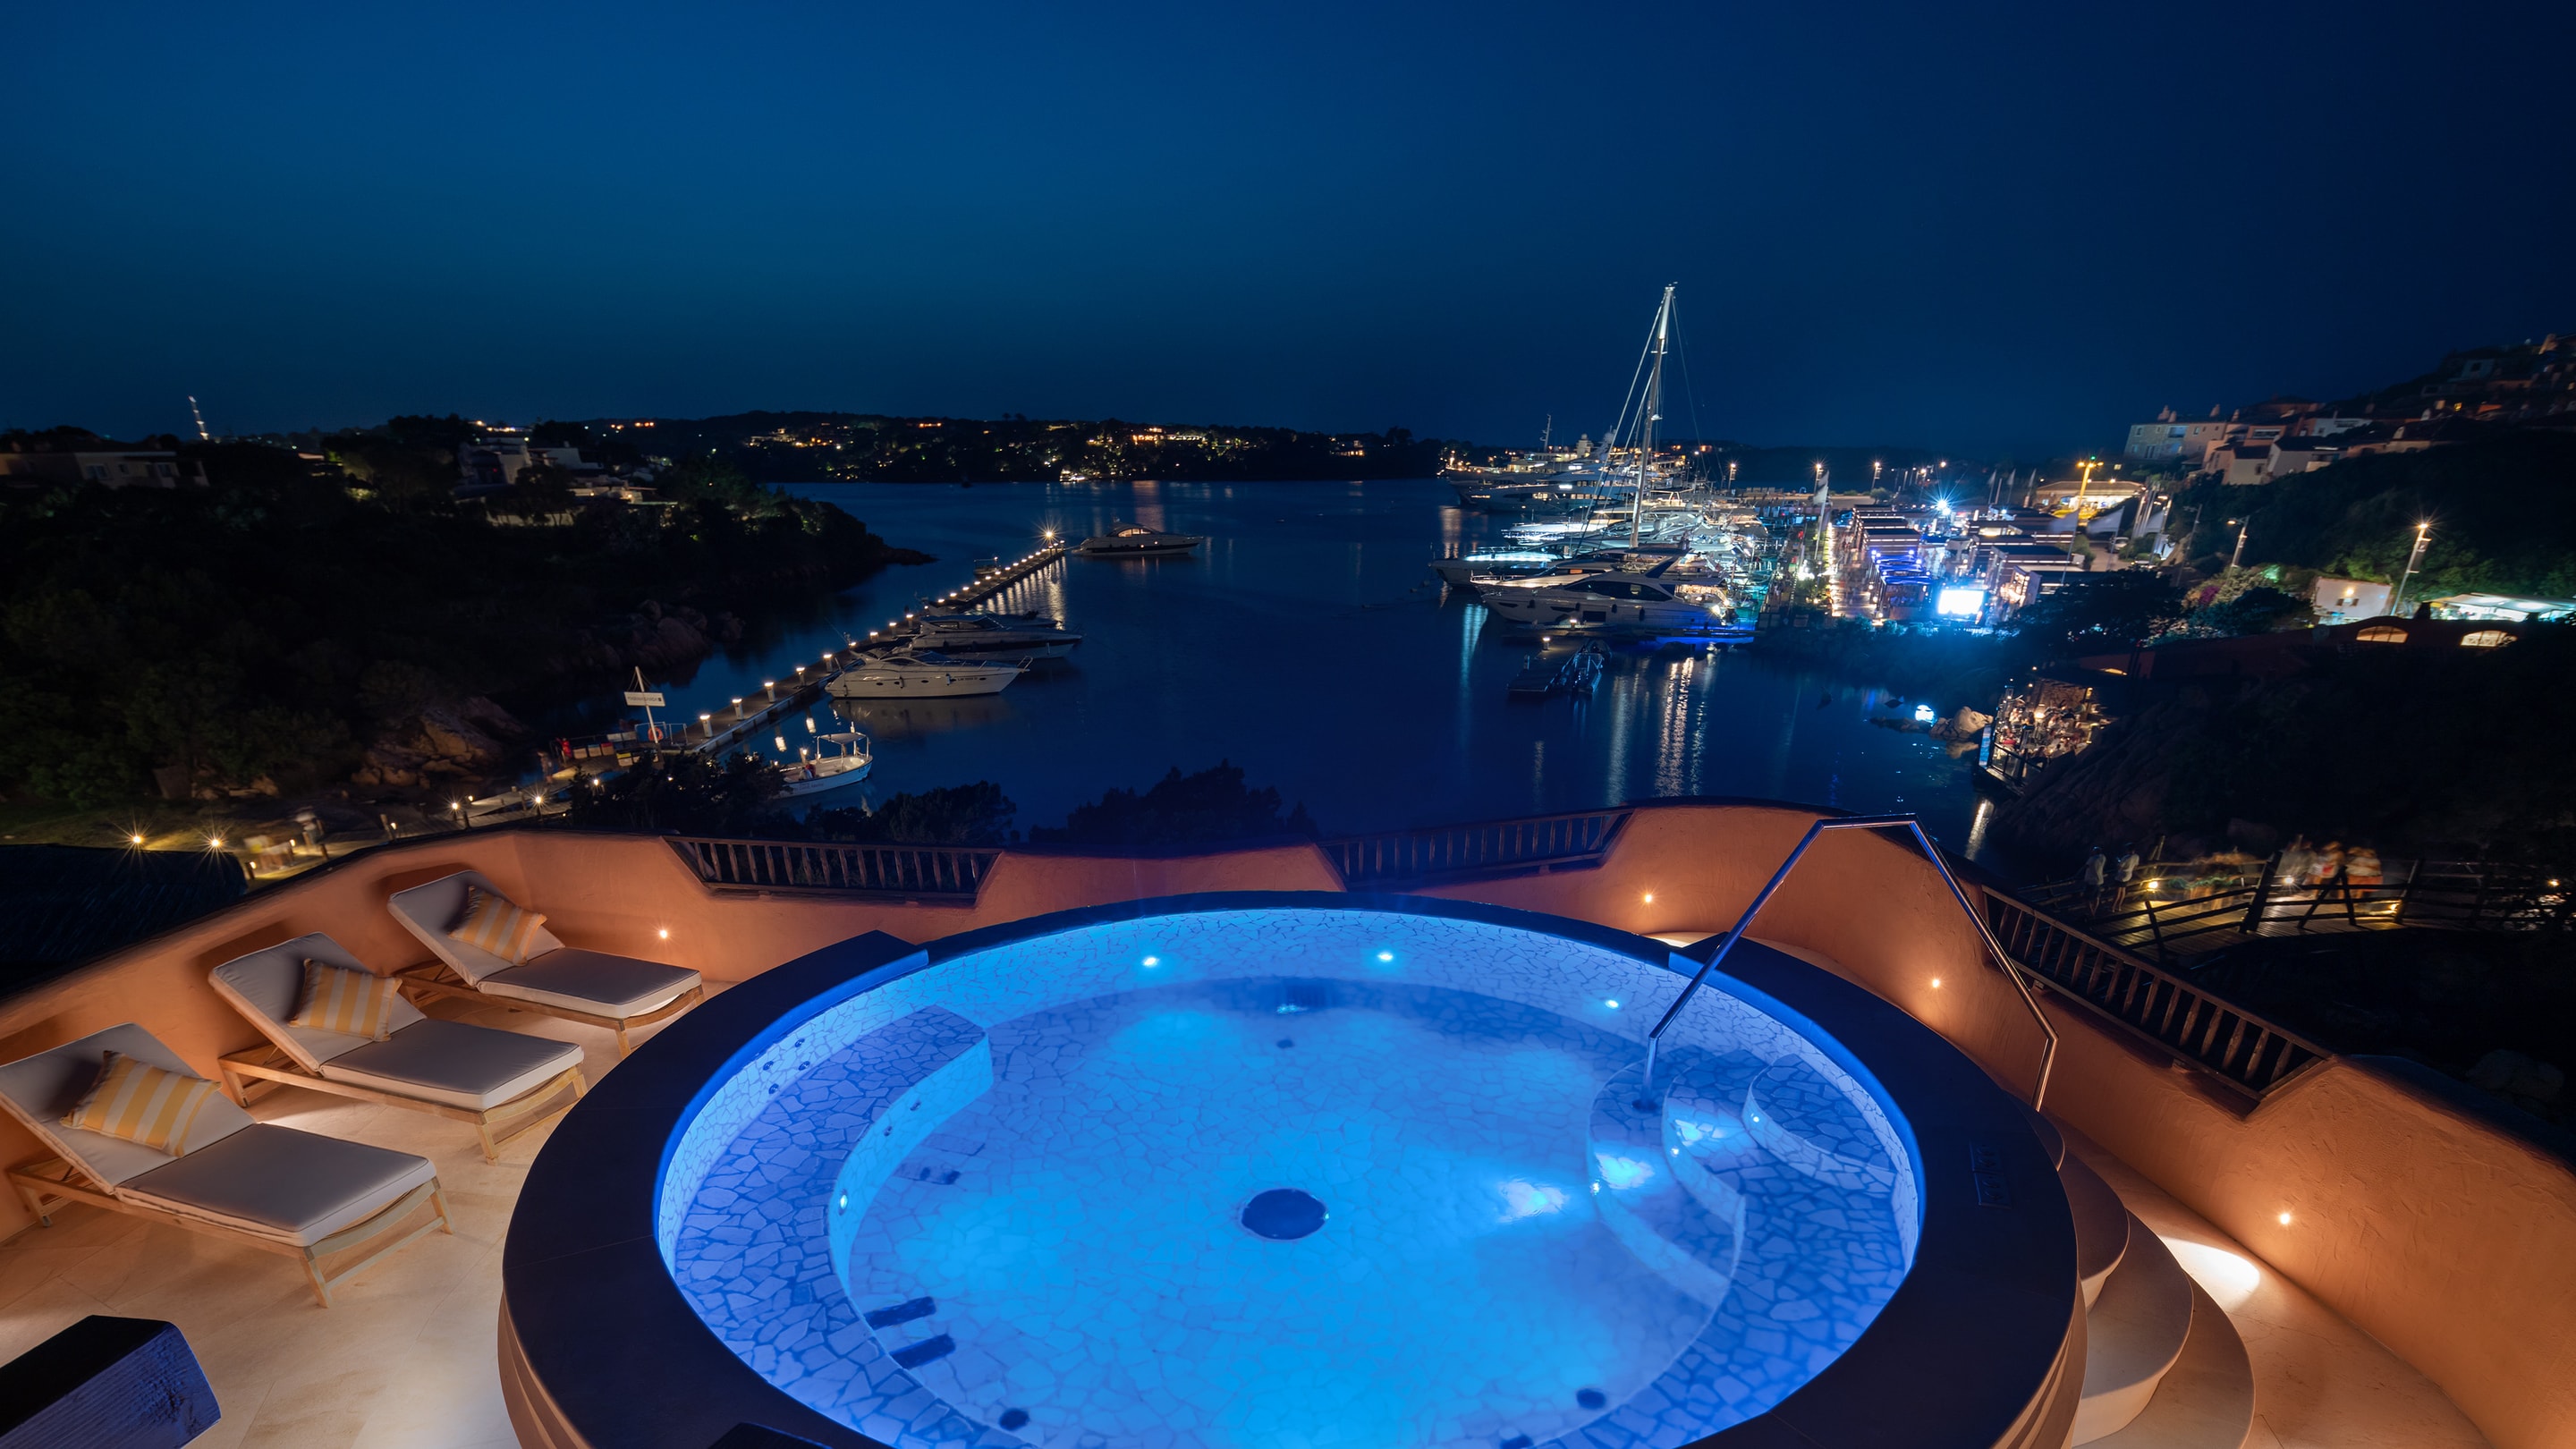 Rooftop jacuzzi with view of city lights.